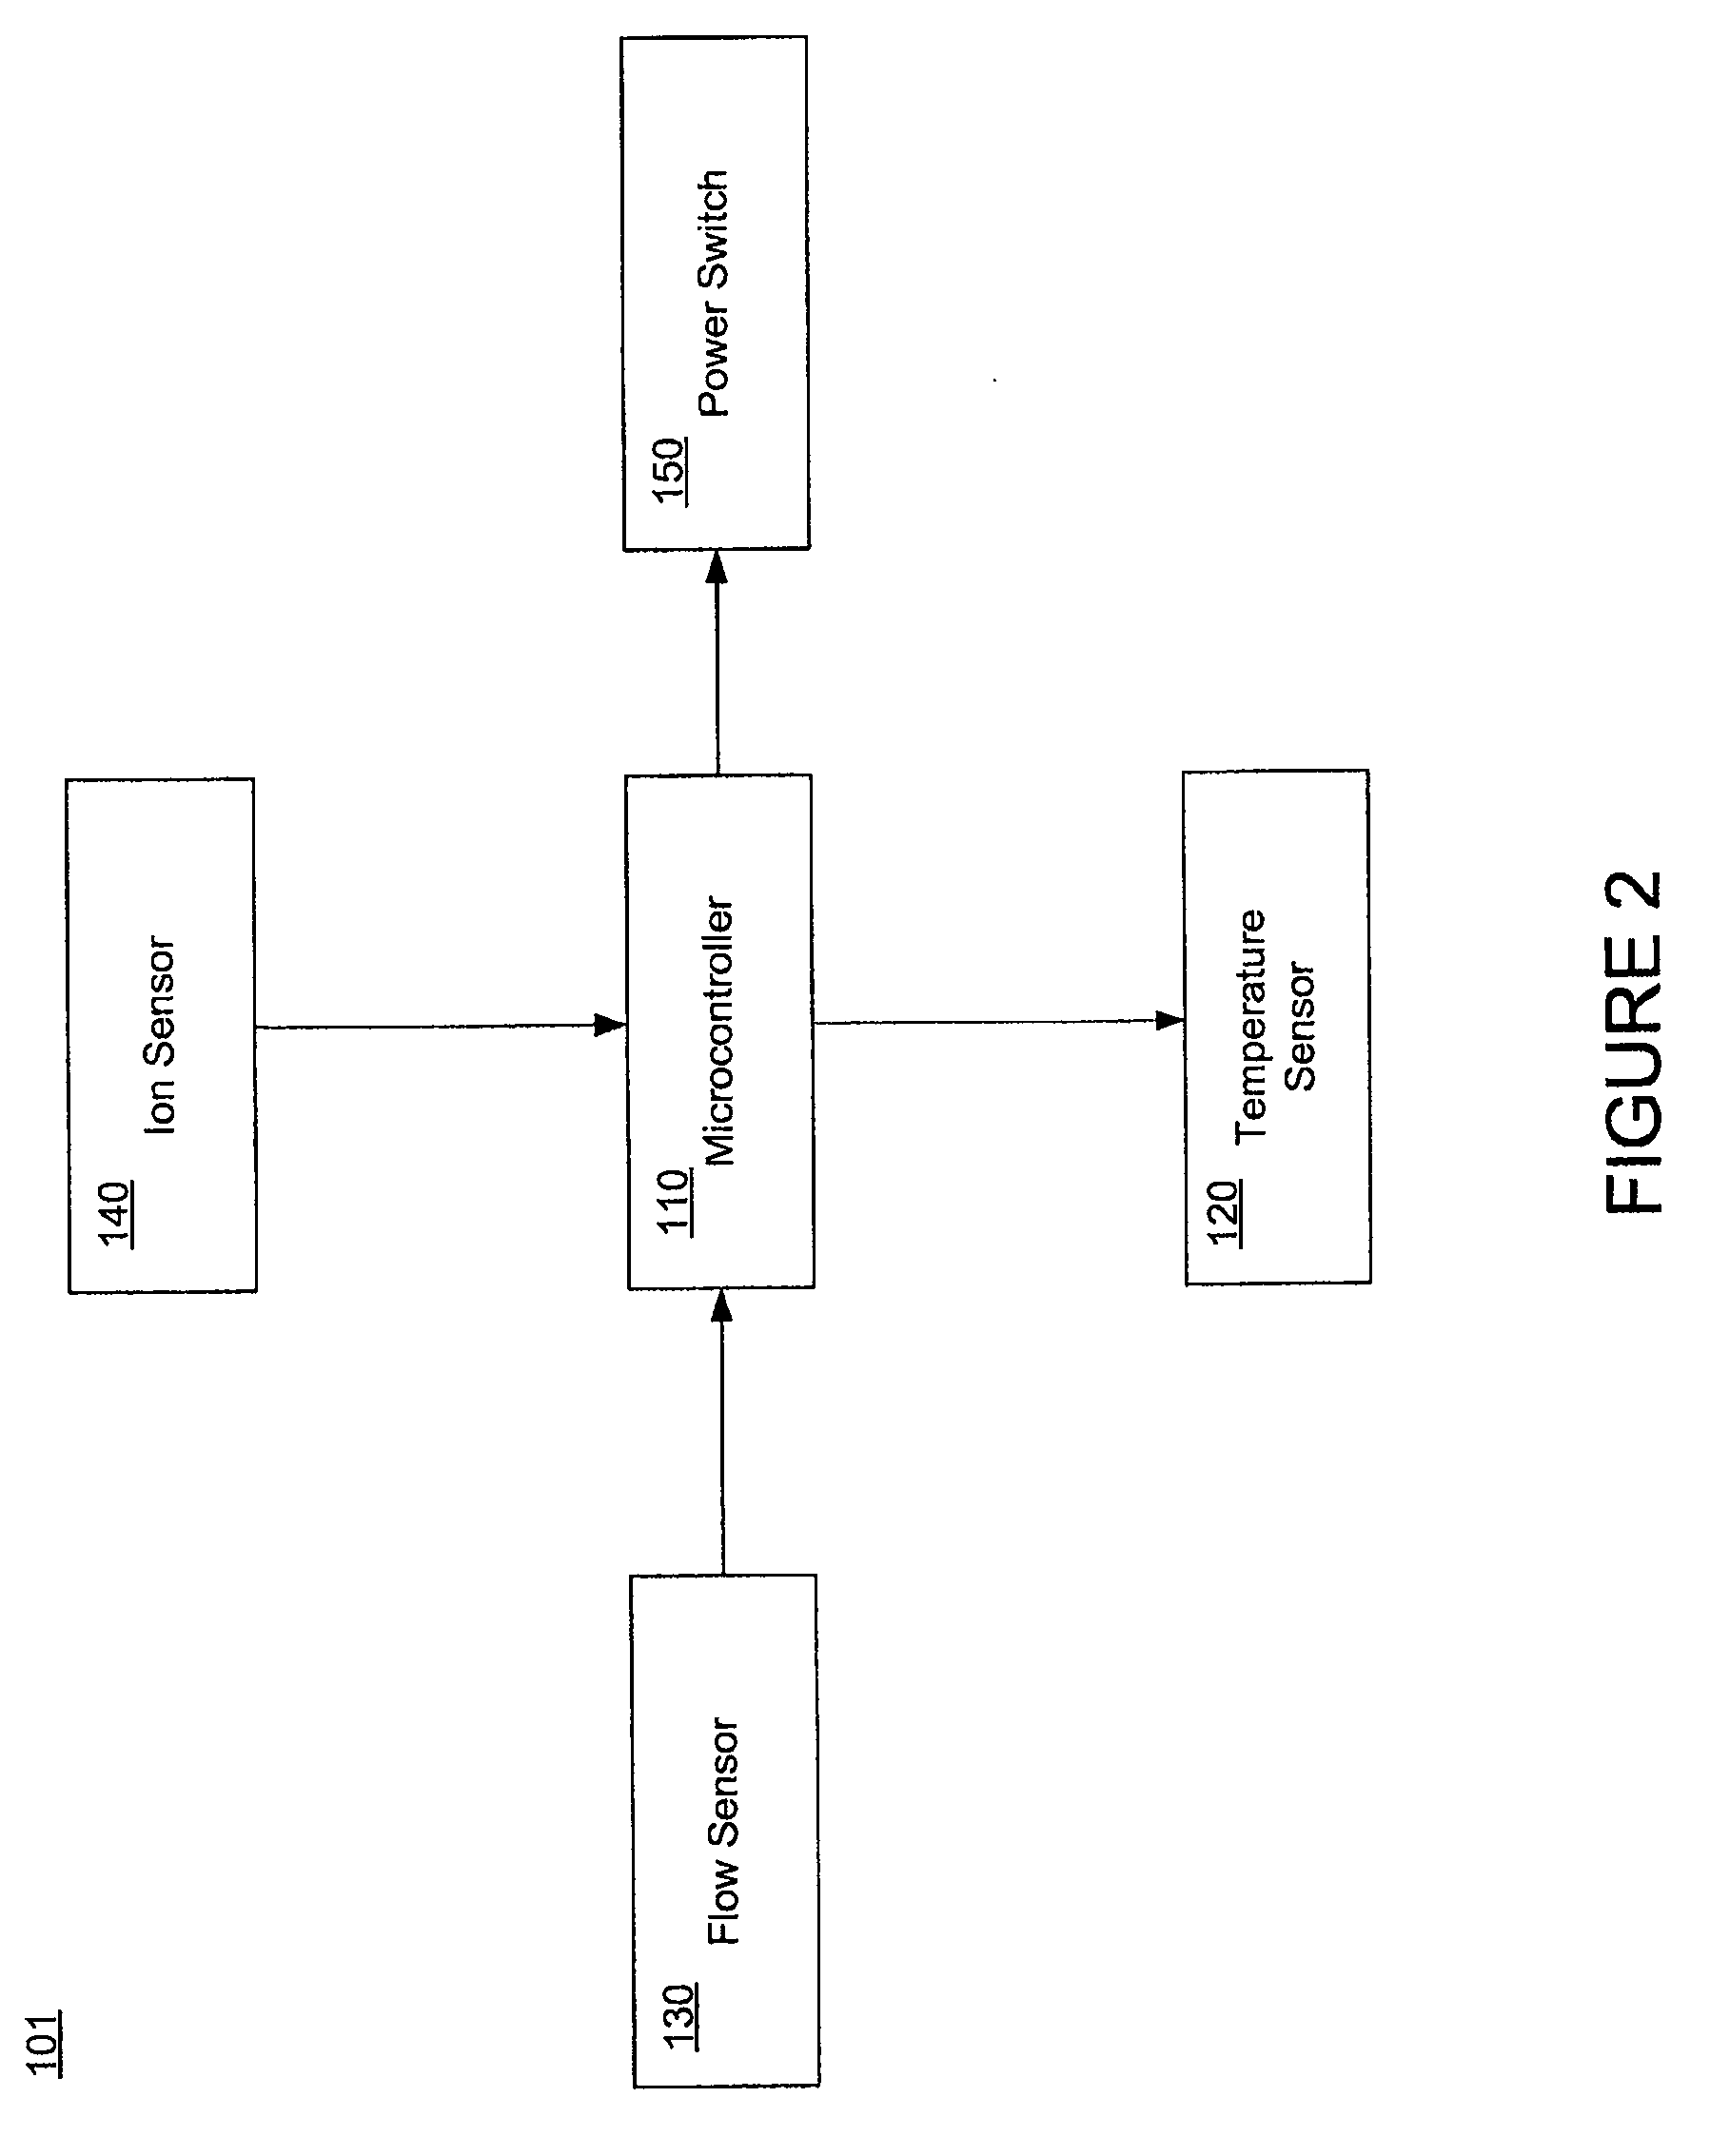 Ionization detector for electrically enhanced air filtration systems